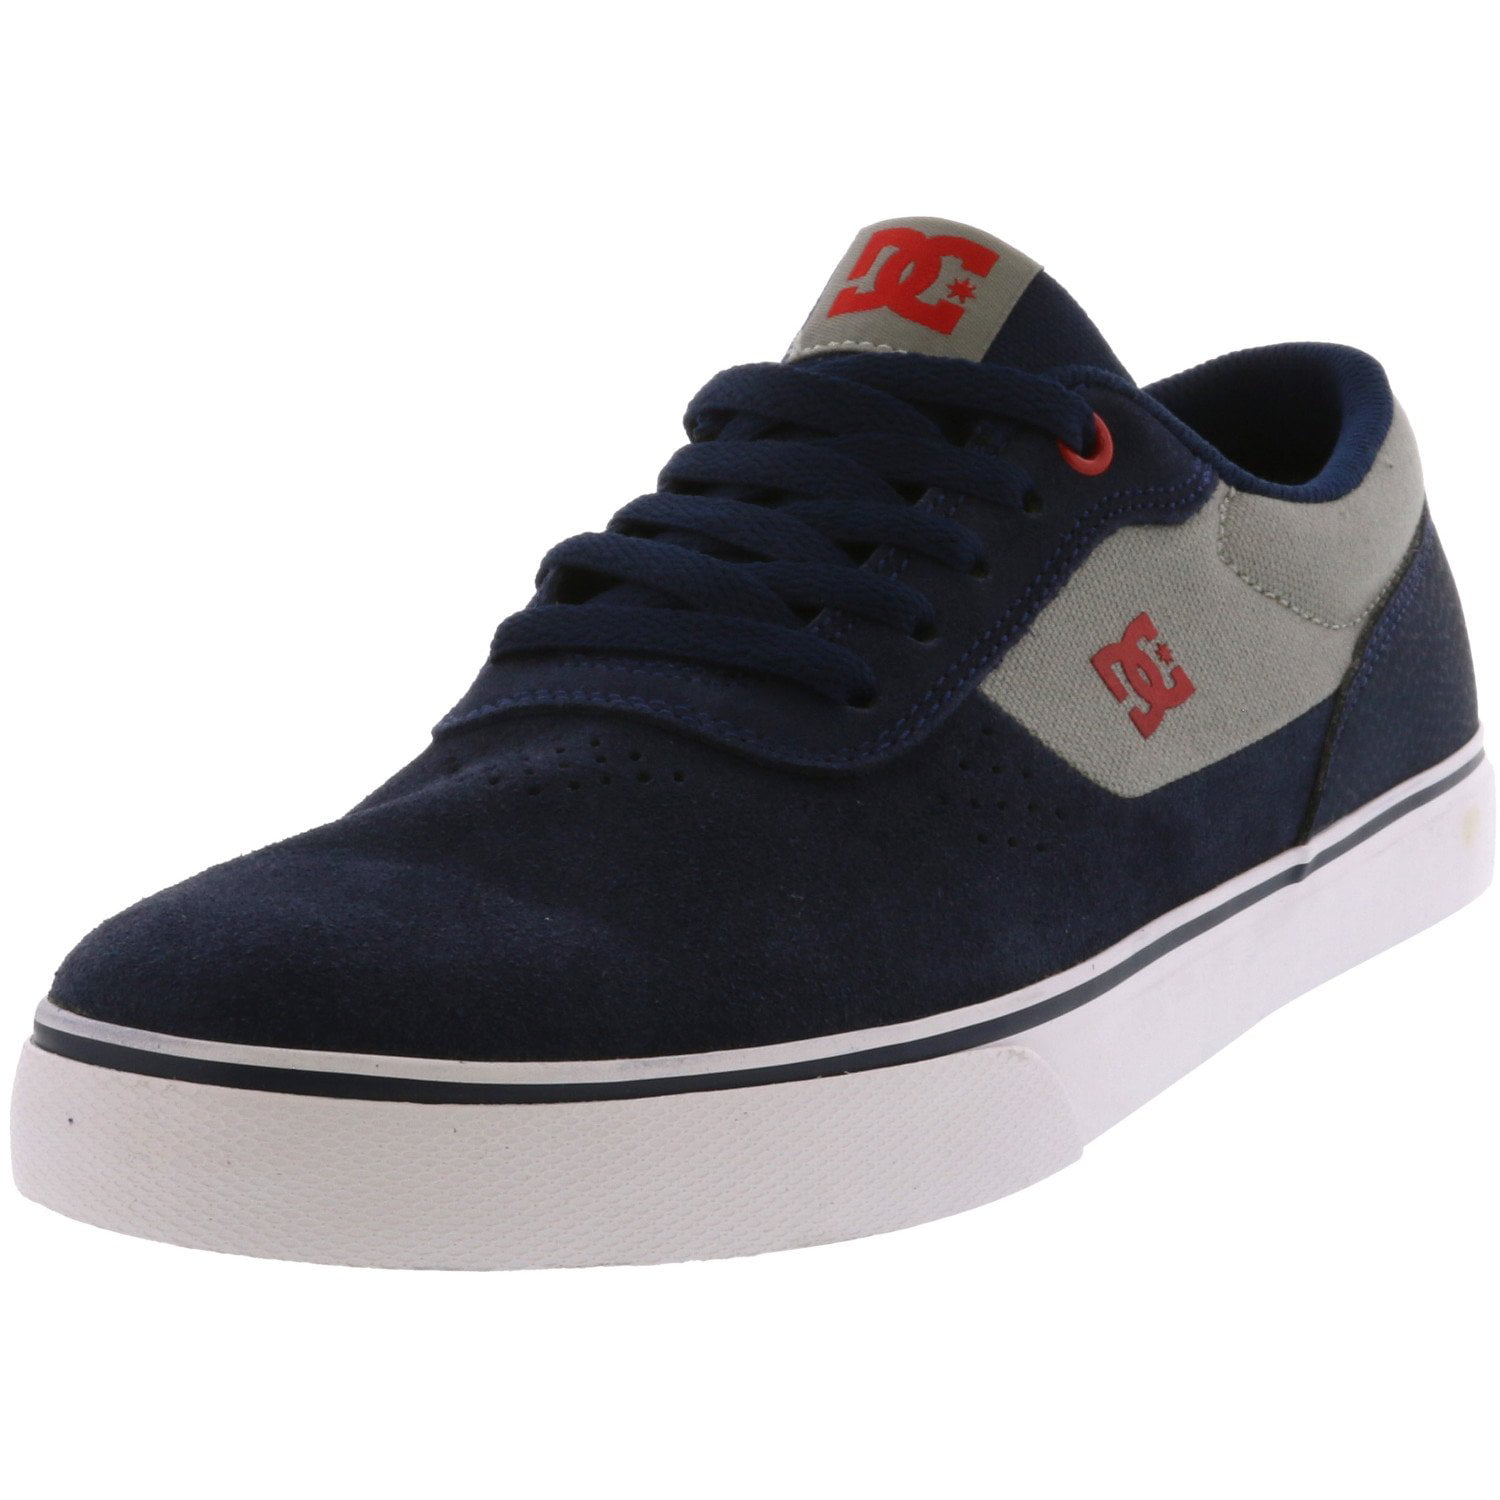 DC Womens Switch Plus S Ankle-High Suede Skateboarding Shoe